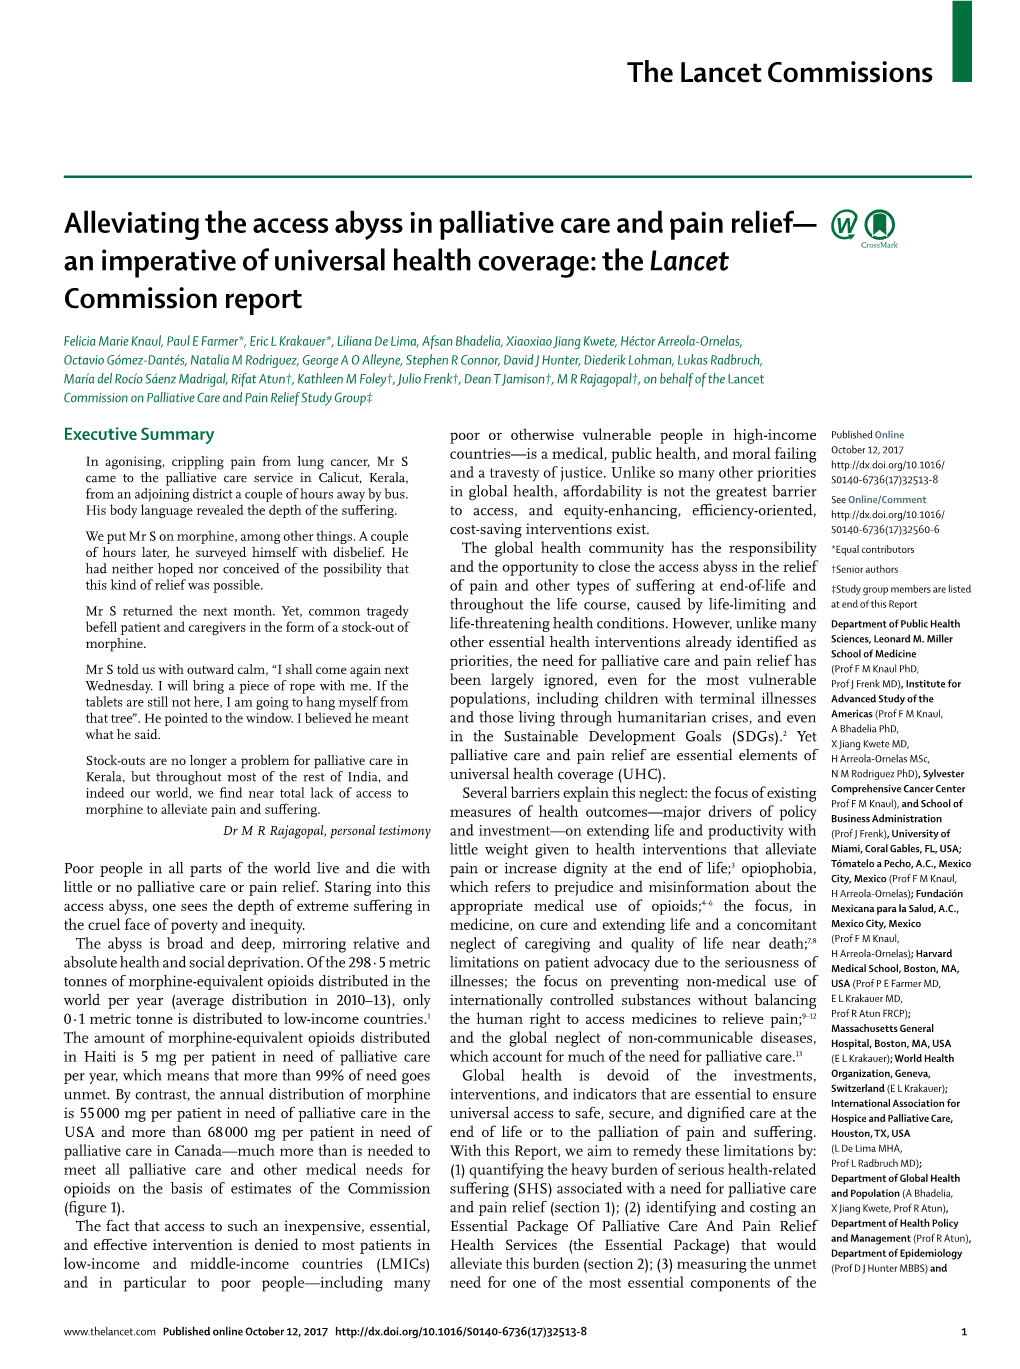 Alleviating the Access Abyss in Palliative Care and Pain Relief— an Imperative of Universal Health Coverage: the Lancet Commission Report